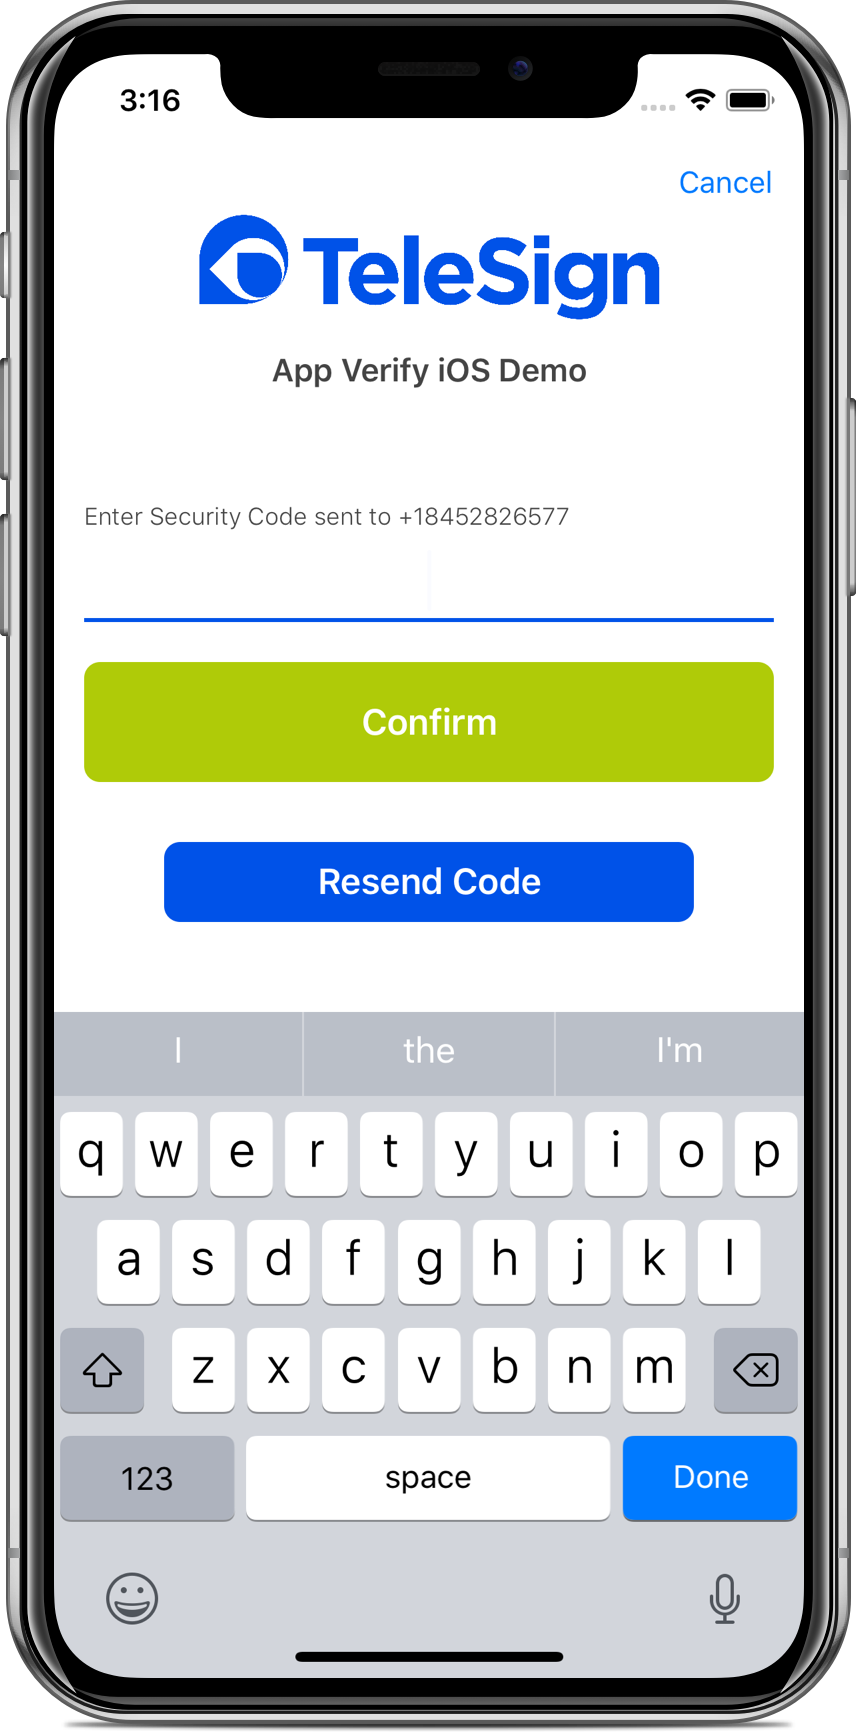 A screenshot of a screen allowing an end user to select either Resend Code or Confirm while submitting a verification code.